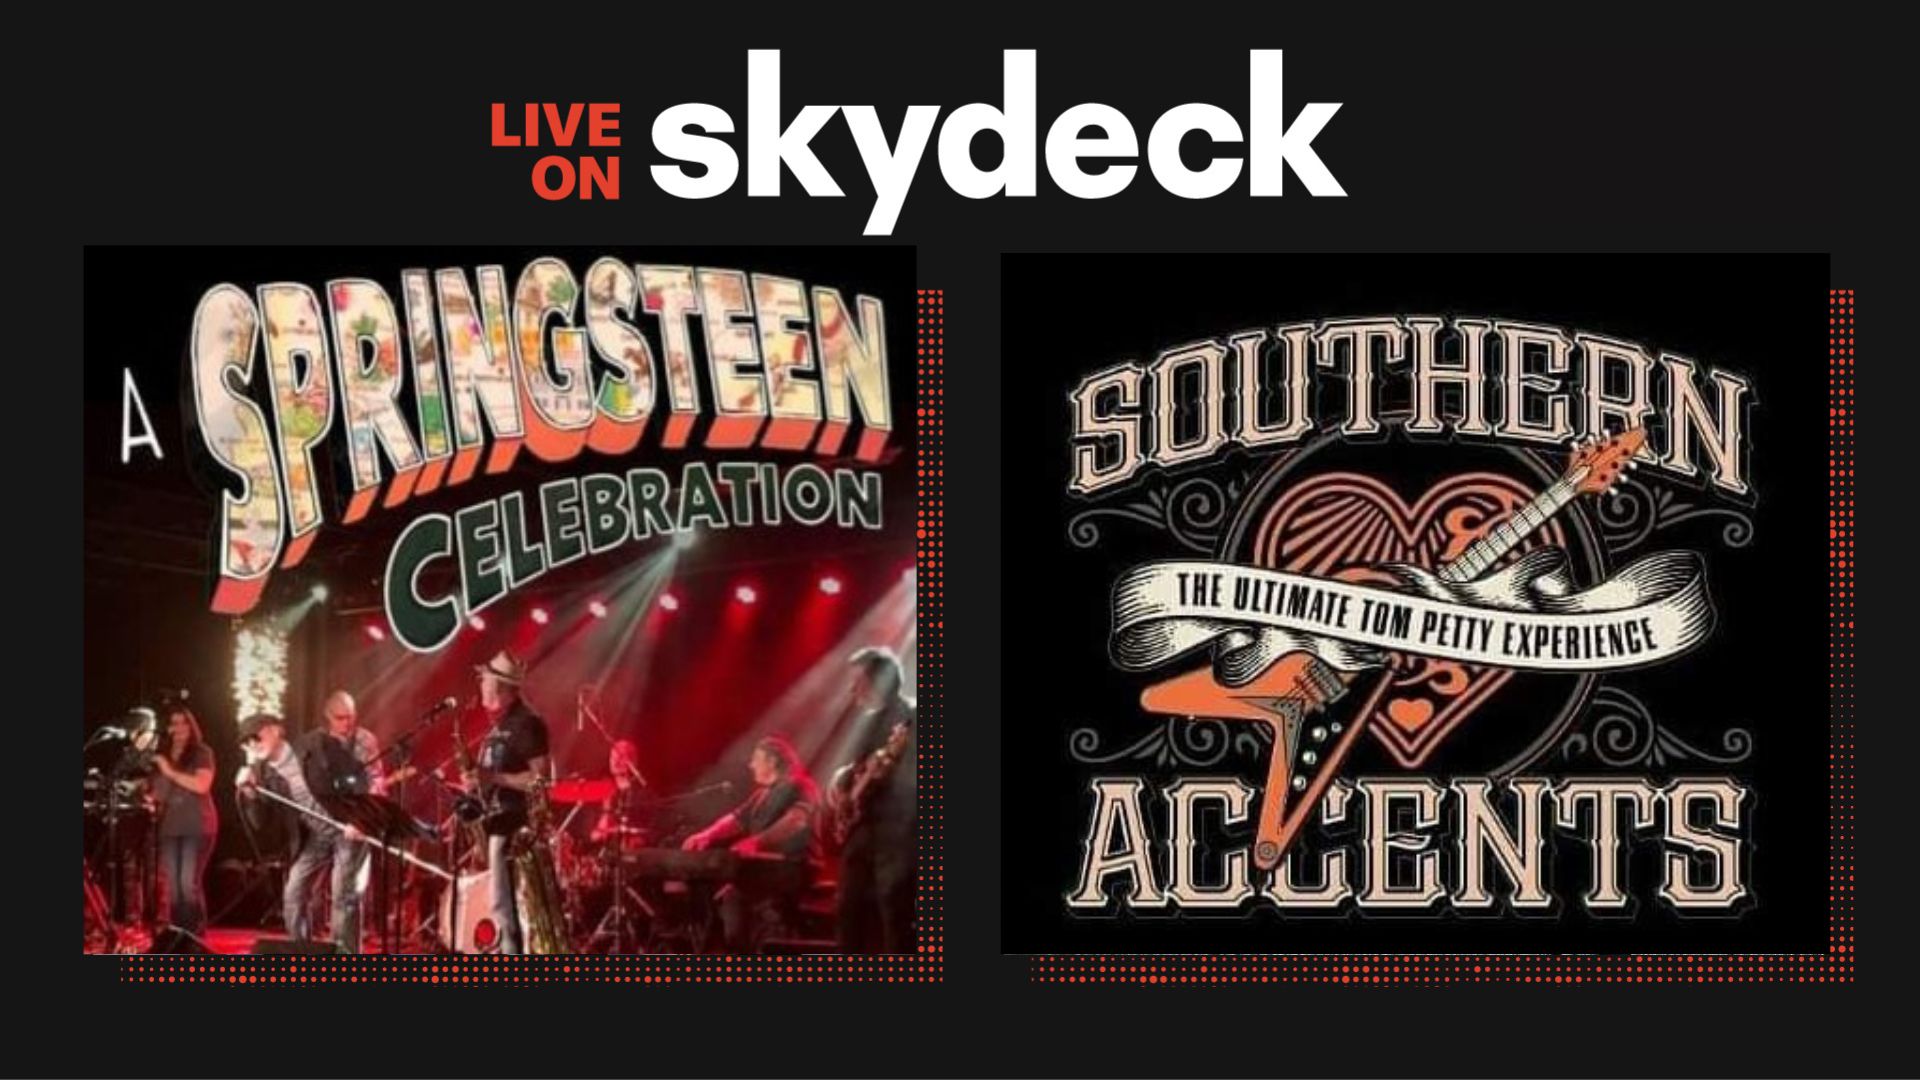 Promo image of Southern Accents + A Springsteen Celebration on Skydeck